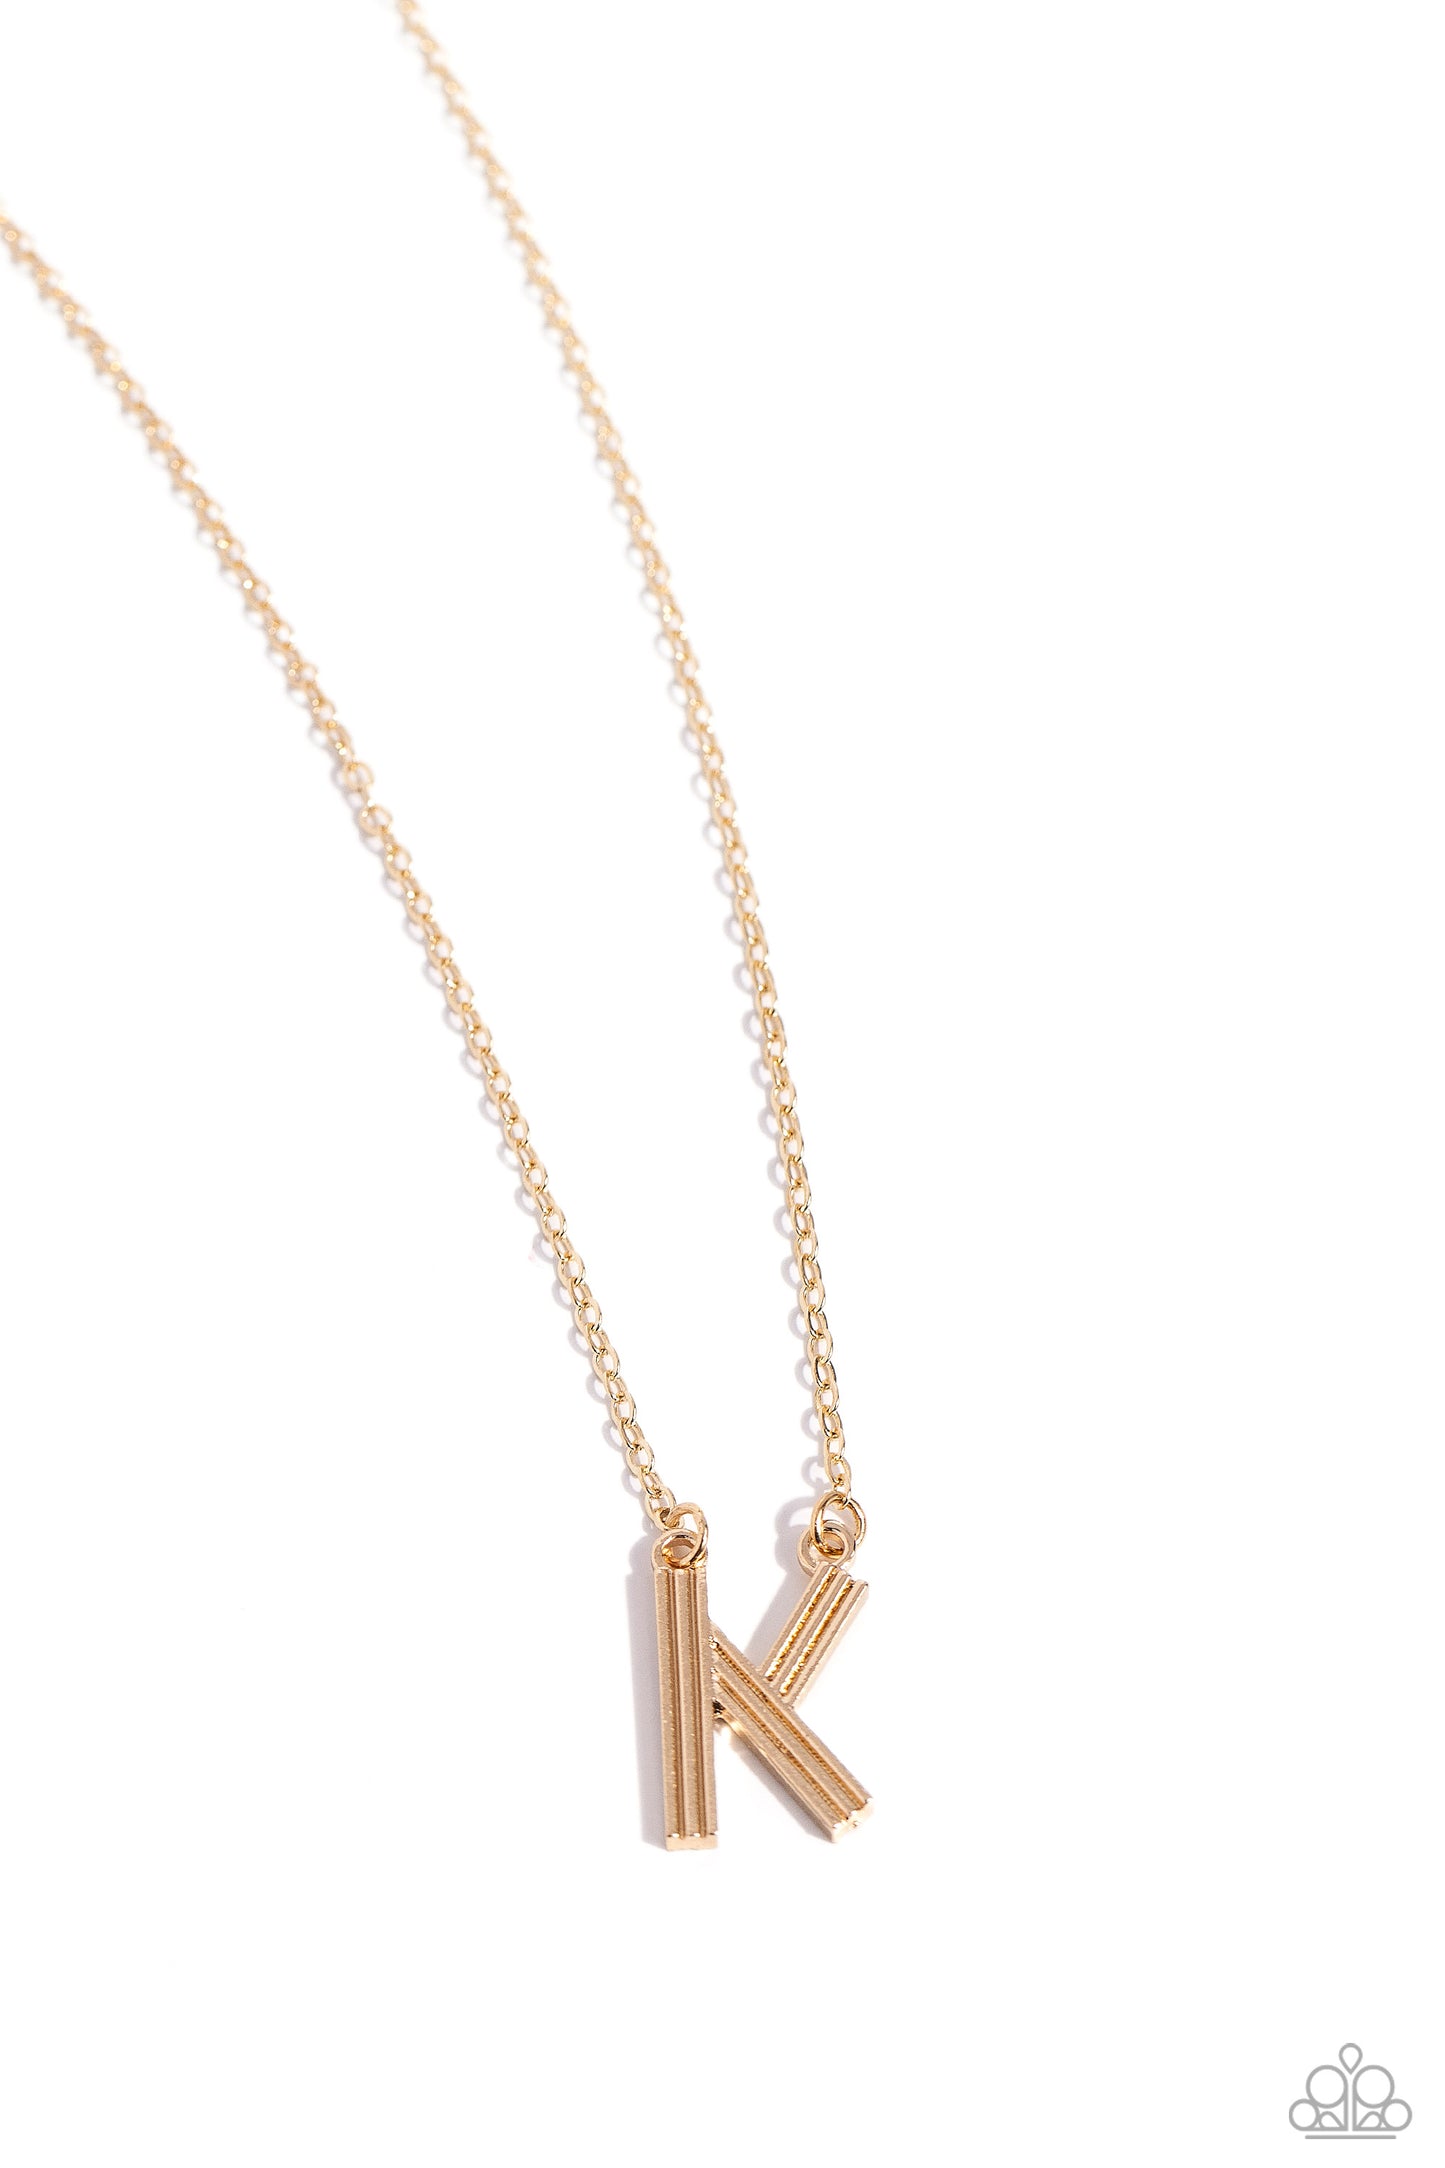 Leave Your Initials Paparazzi Accessories Necklace with Earrings Gold - K